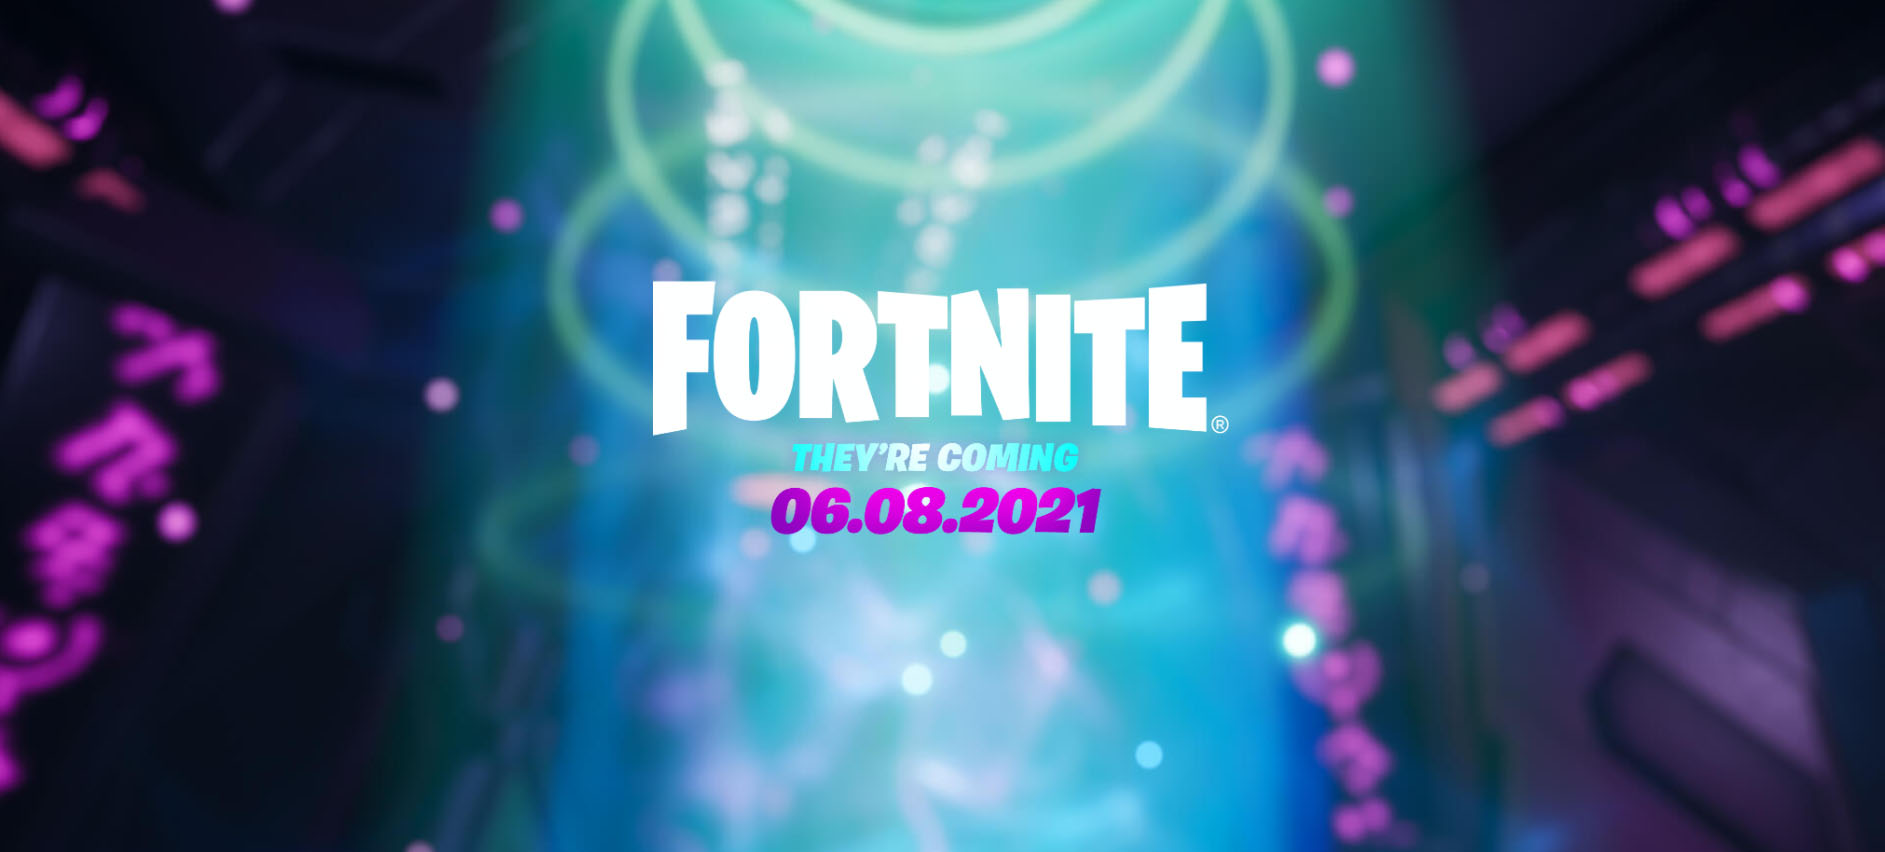 Fortnite New Season June 8th Ufos Just Invaded Fortnite As The End Nears For Chapter 2 Season 6 Space